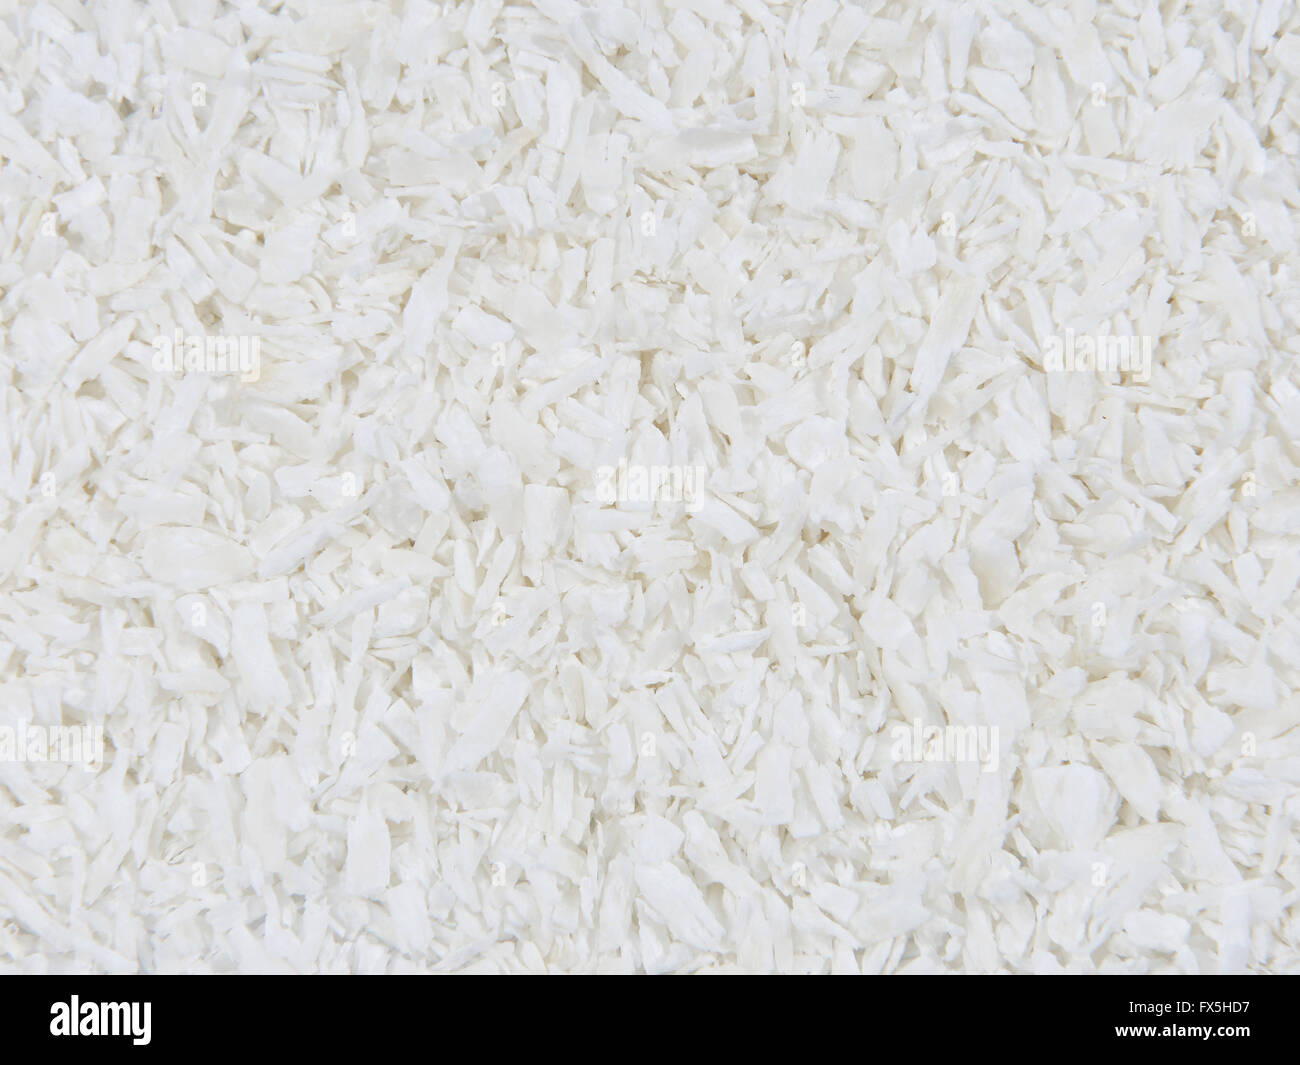 Closeup image of fresh ecological grated coconut Stock Photo